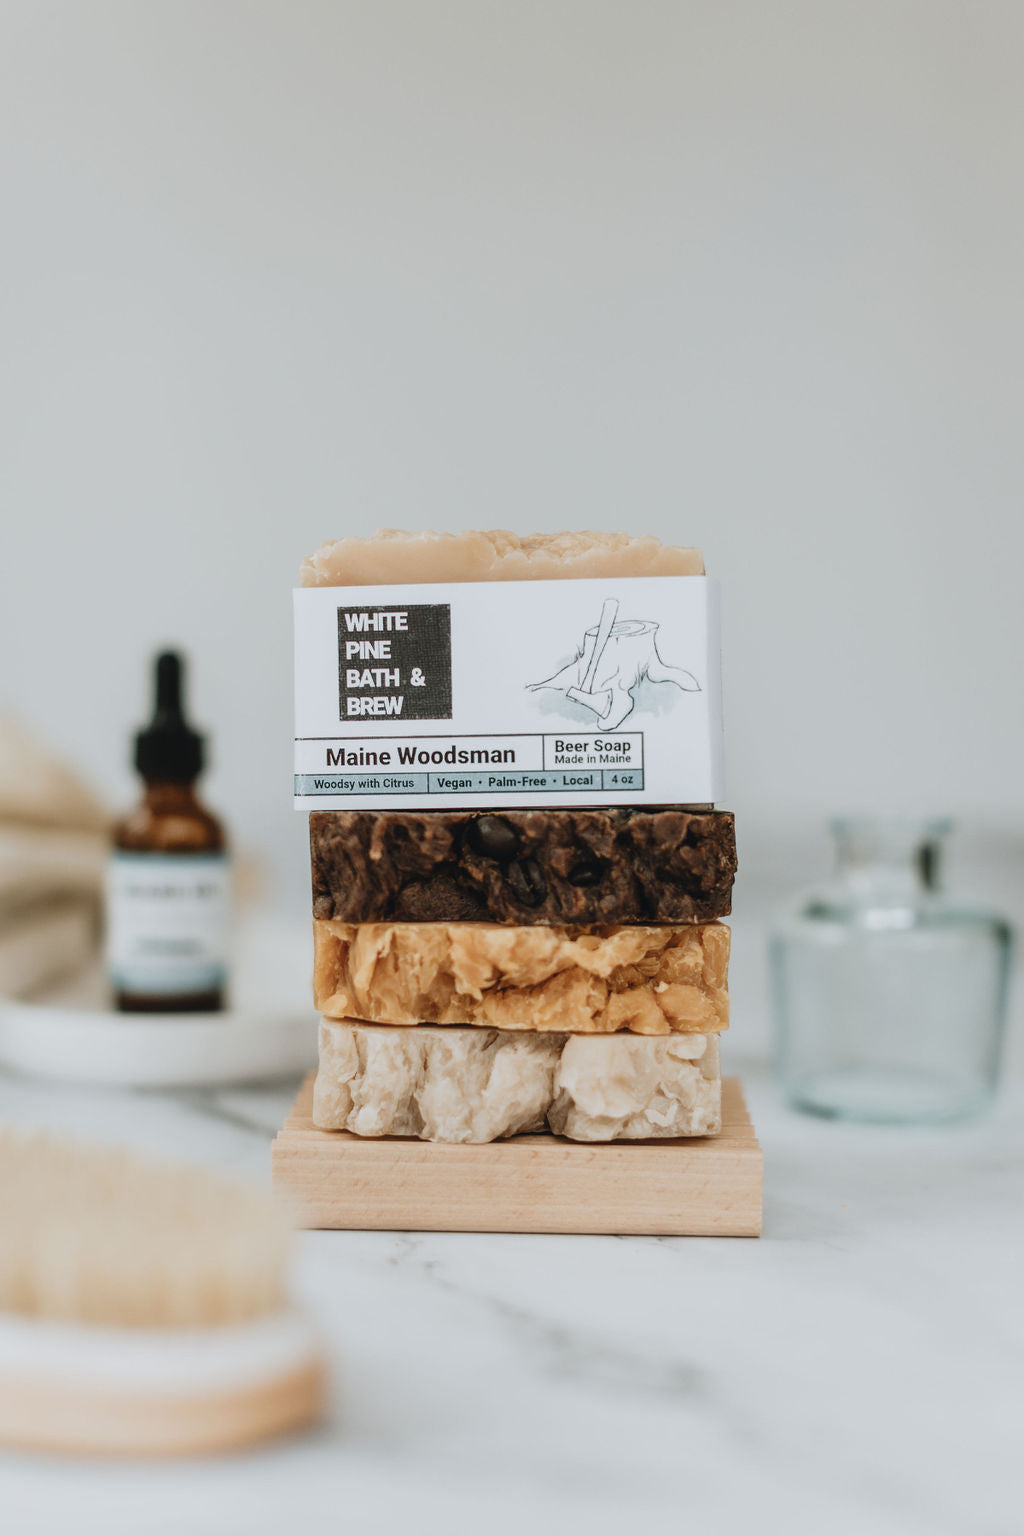 collection of self care items including a bar of vegan, beer soap called Sea Salt & Clay by White Pine Bath & Brew